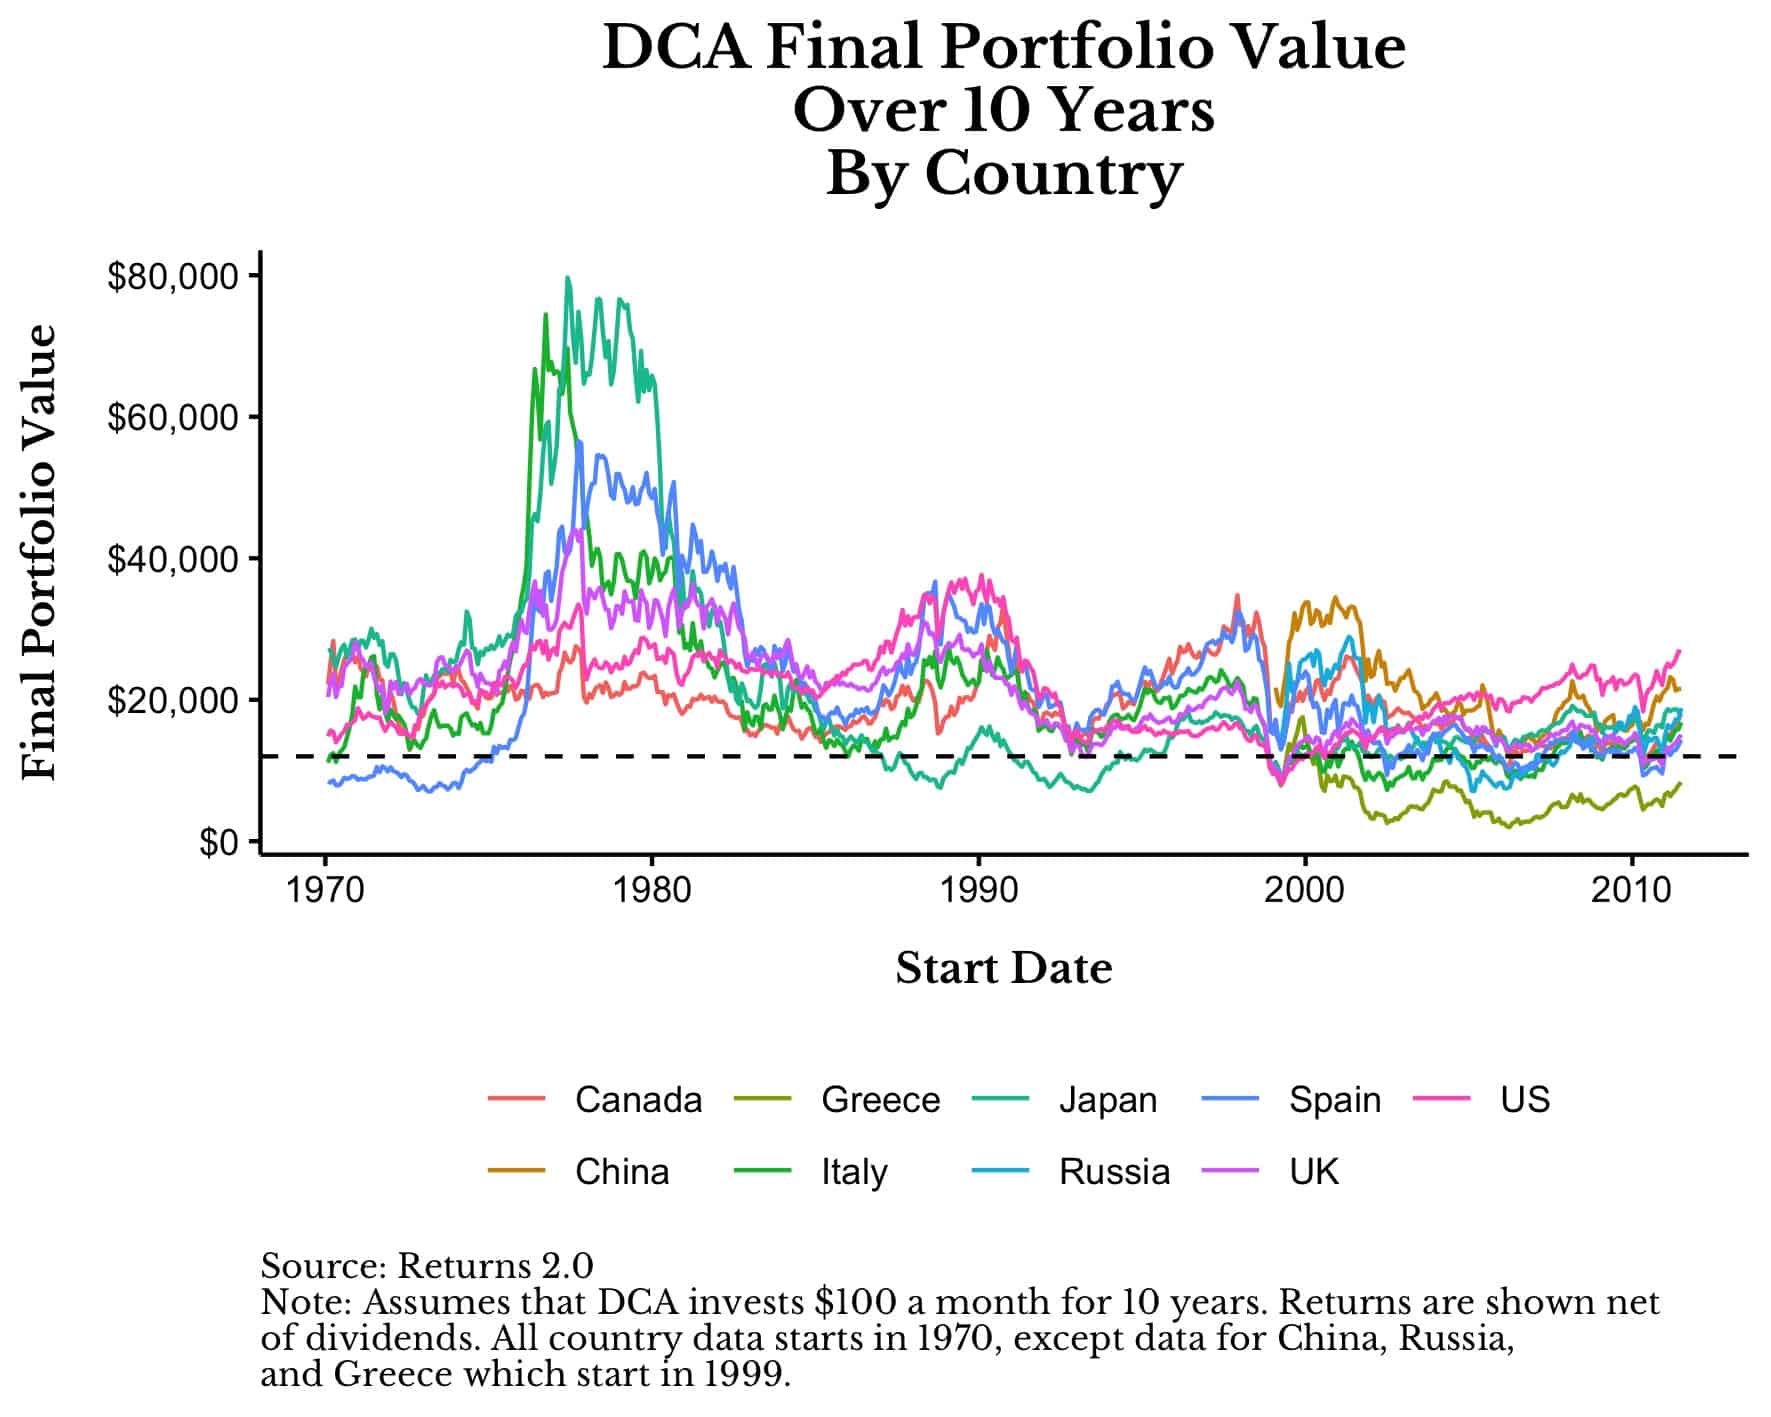 Dollar cost averaging final portfolio value over 10 years for various developed stock markets.